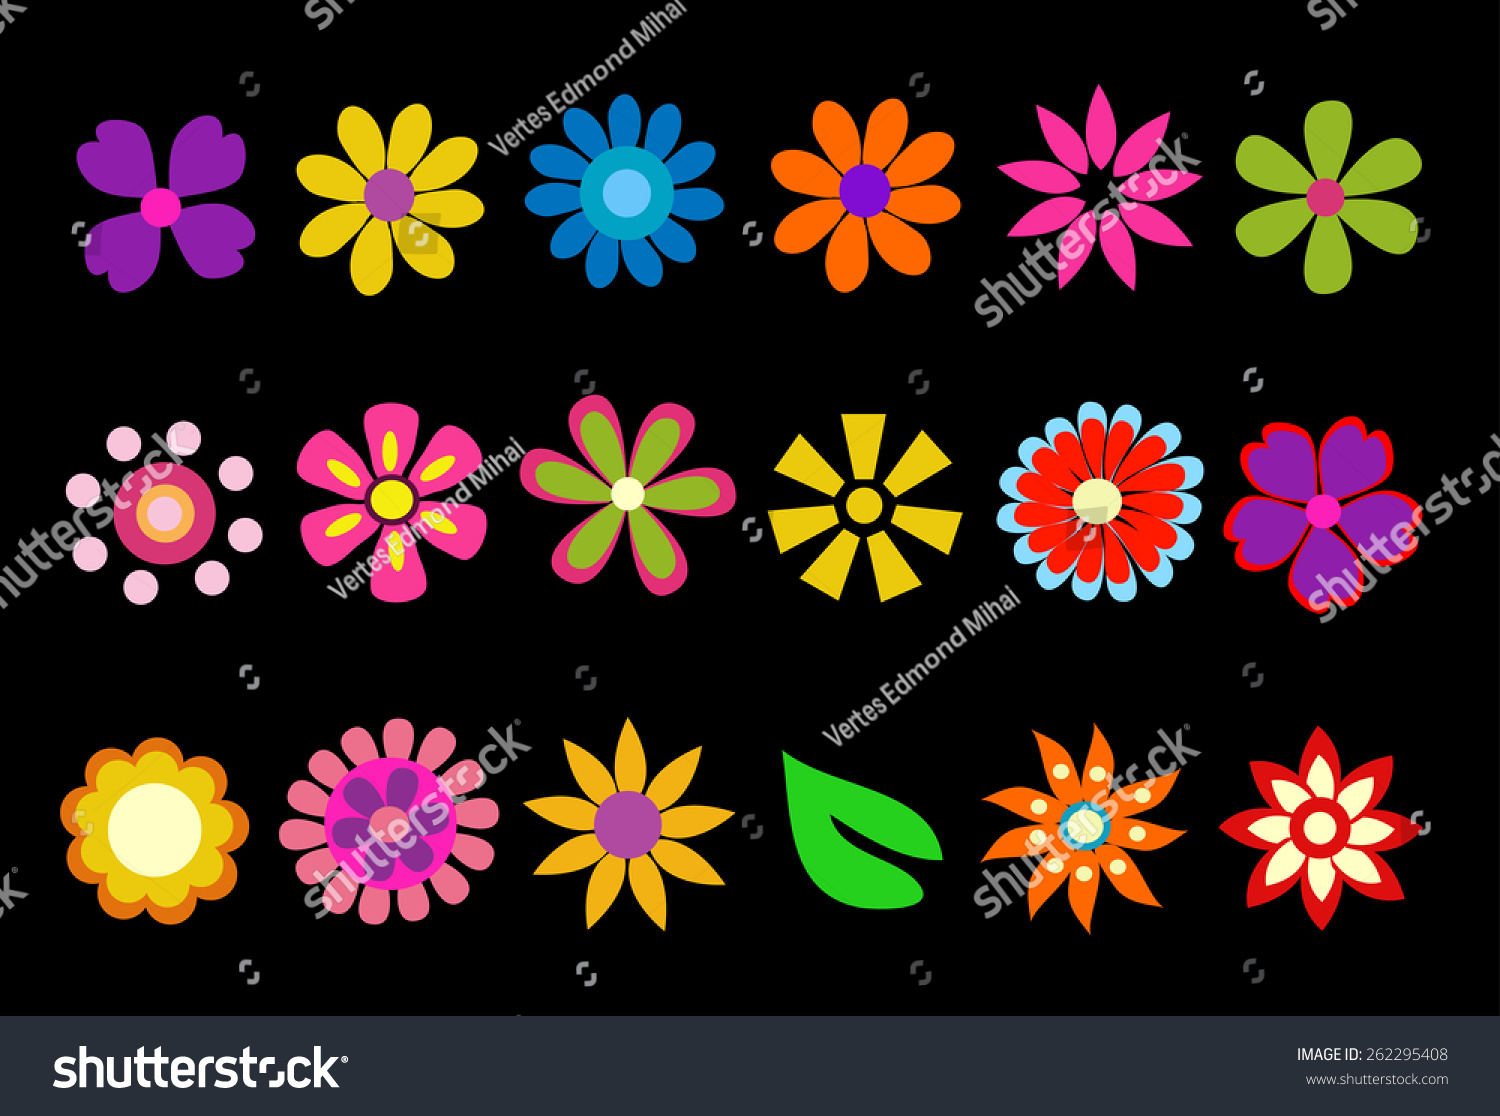 Colorful Spring Flowers Vector Illustration Stock Vector (Royalty Free ...